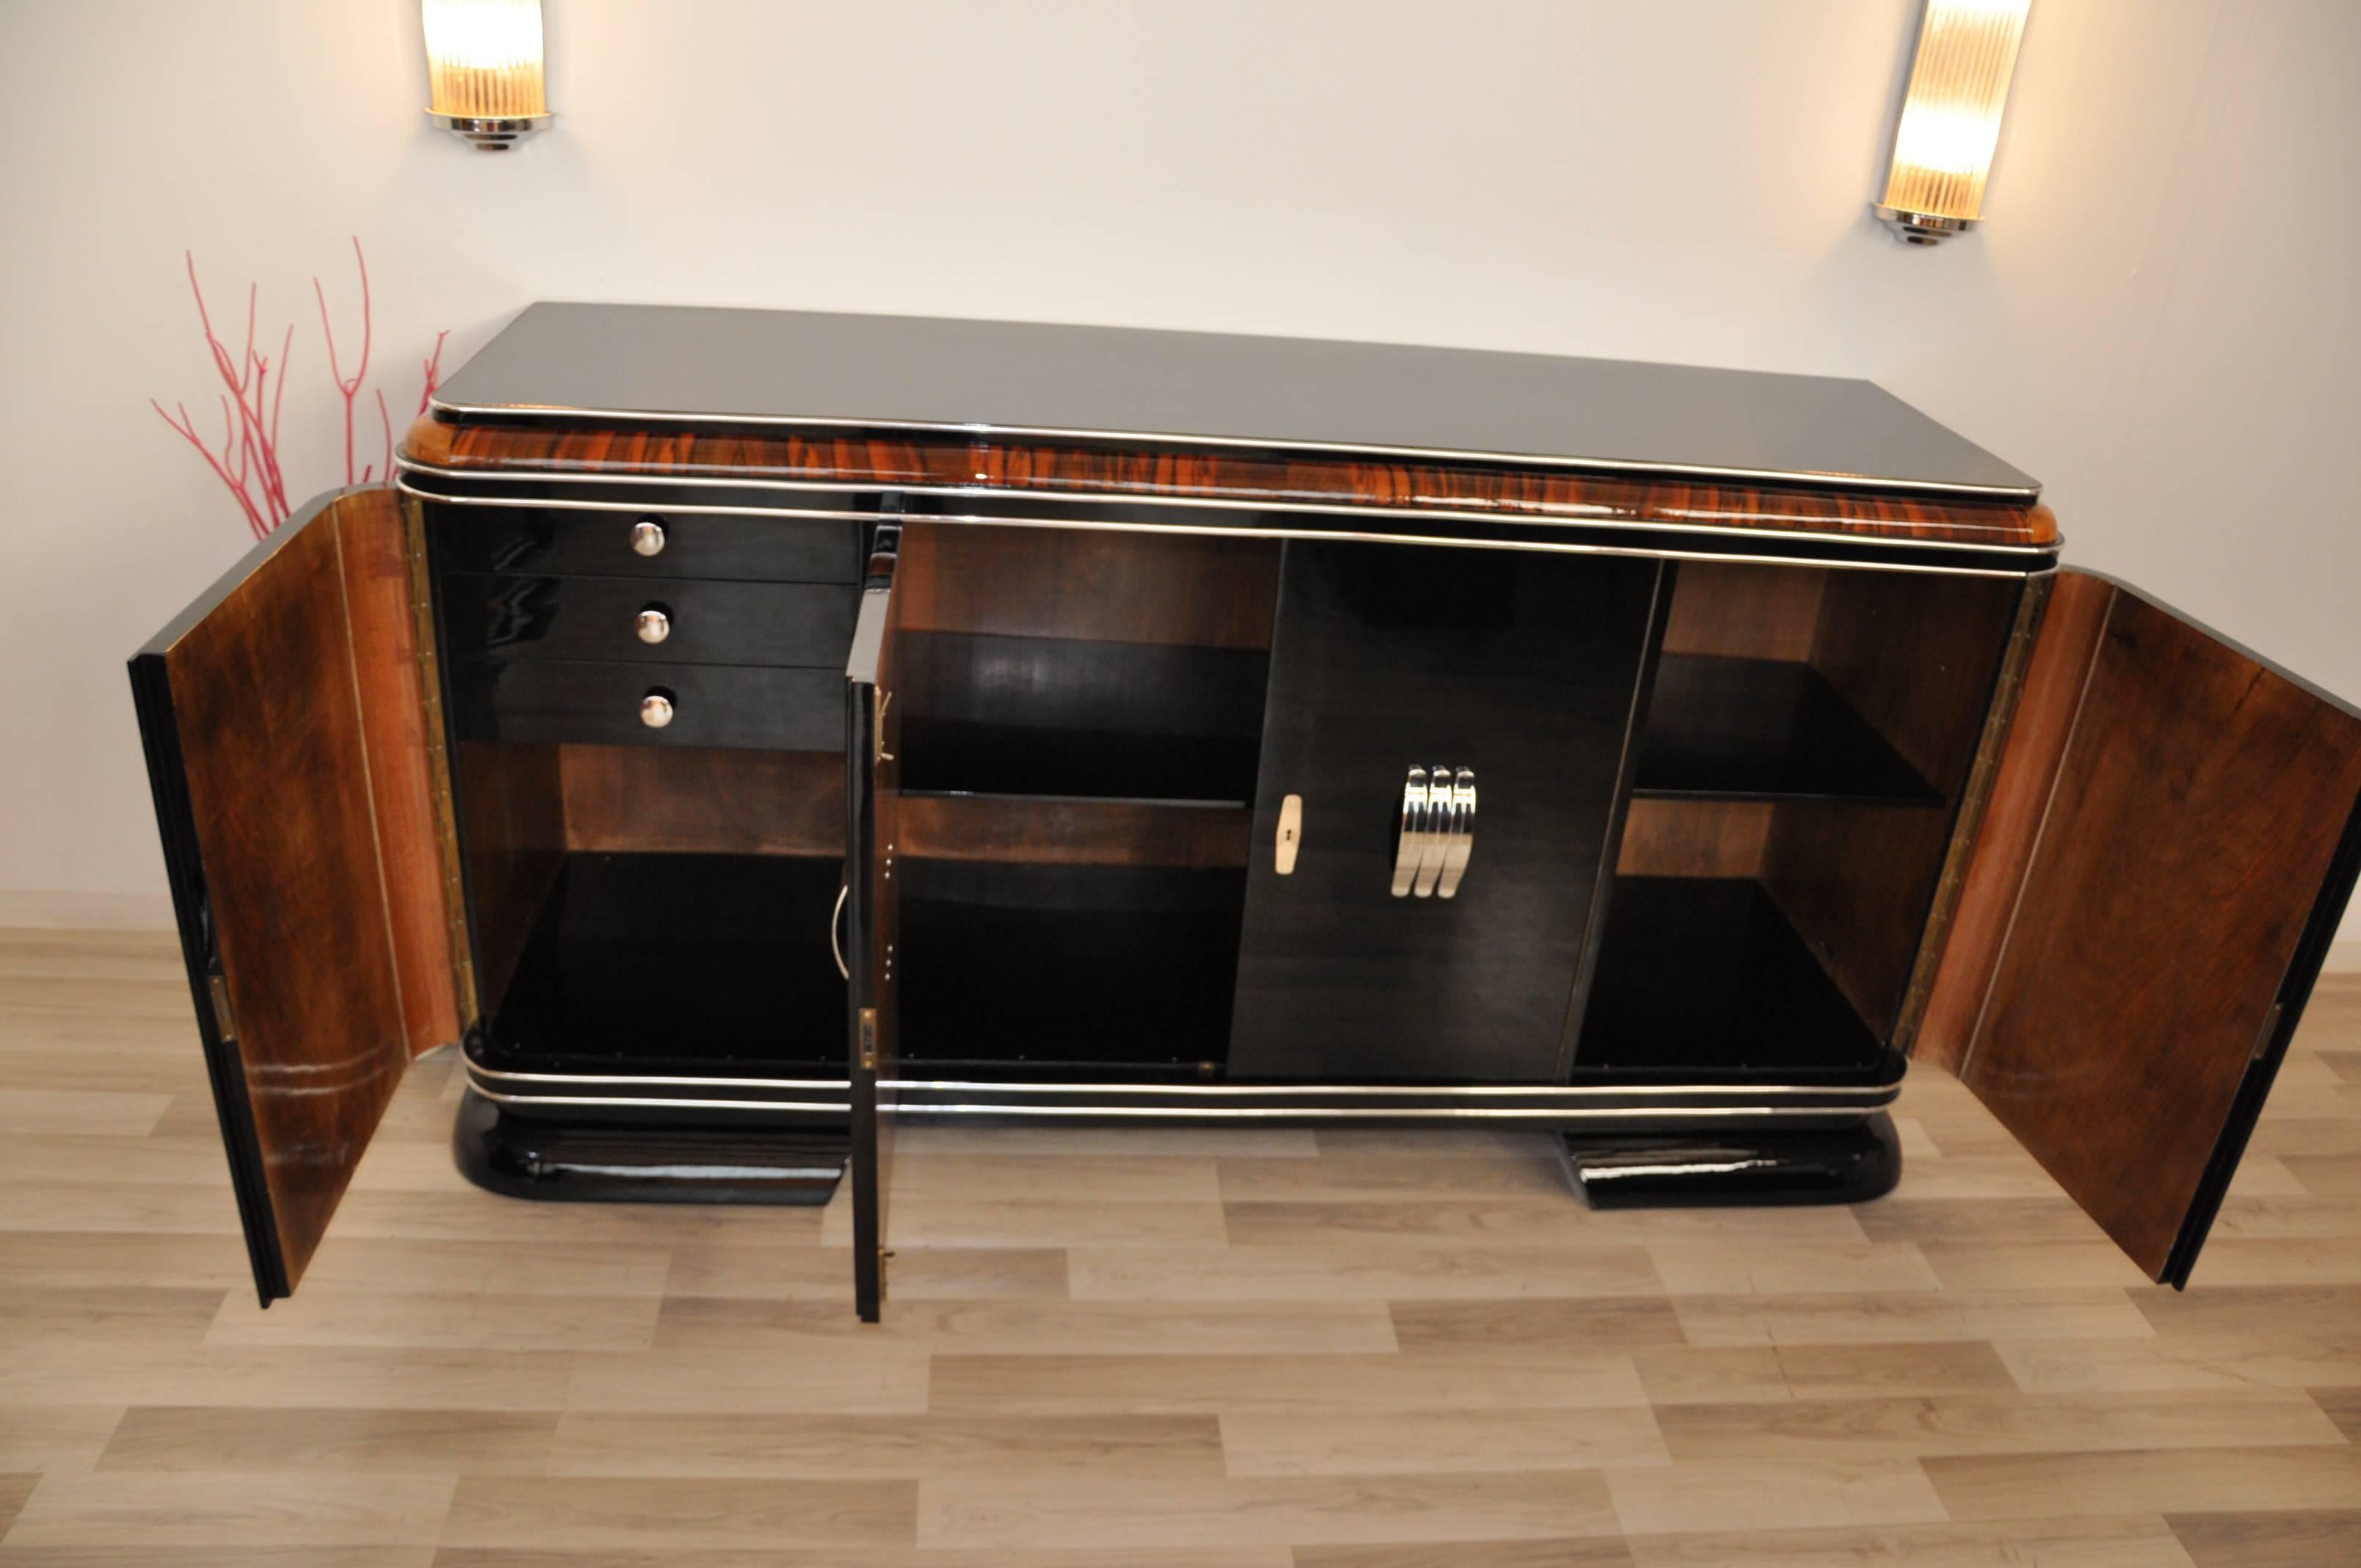 Early 20th Century French Art Deco Sideboard with Piano Lacquer and Mahogany Details